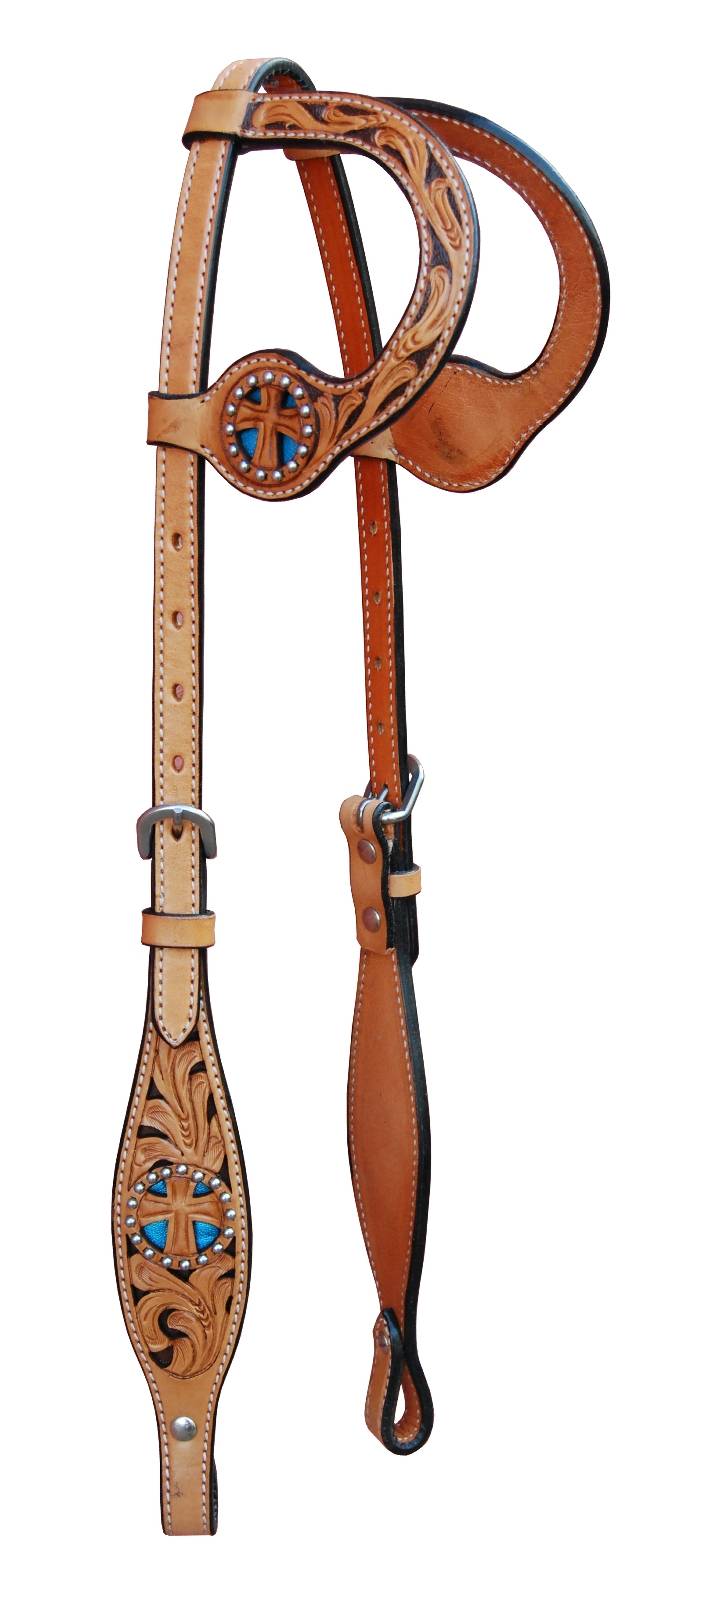 468923TURQ HRSE Turn-Two Double Ear Headstall - St. Christopher sku 468923TURQ HRSE